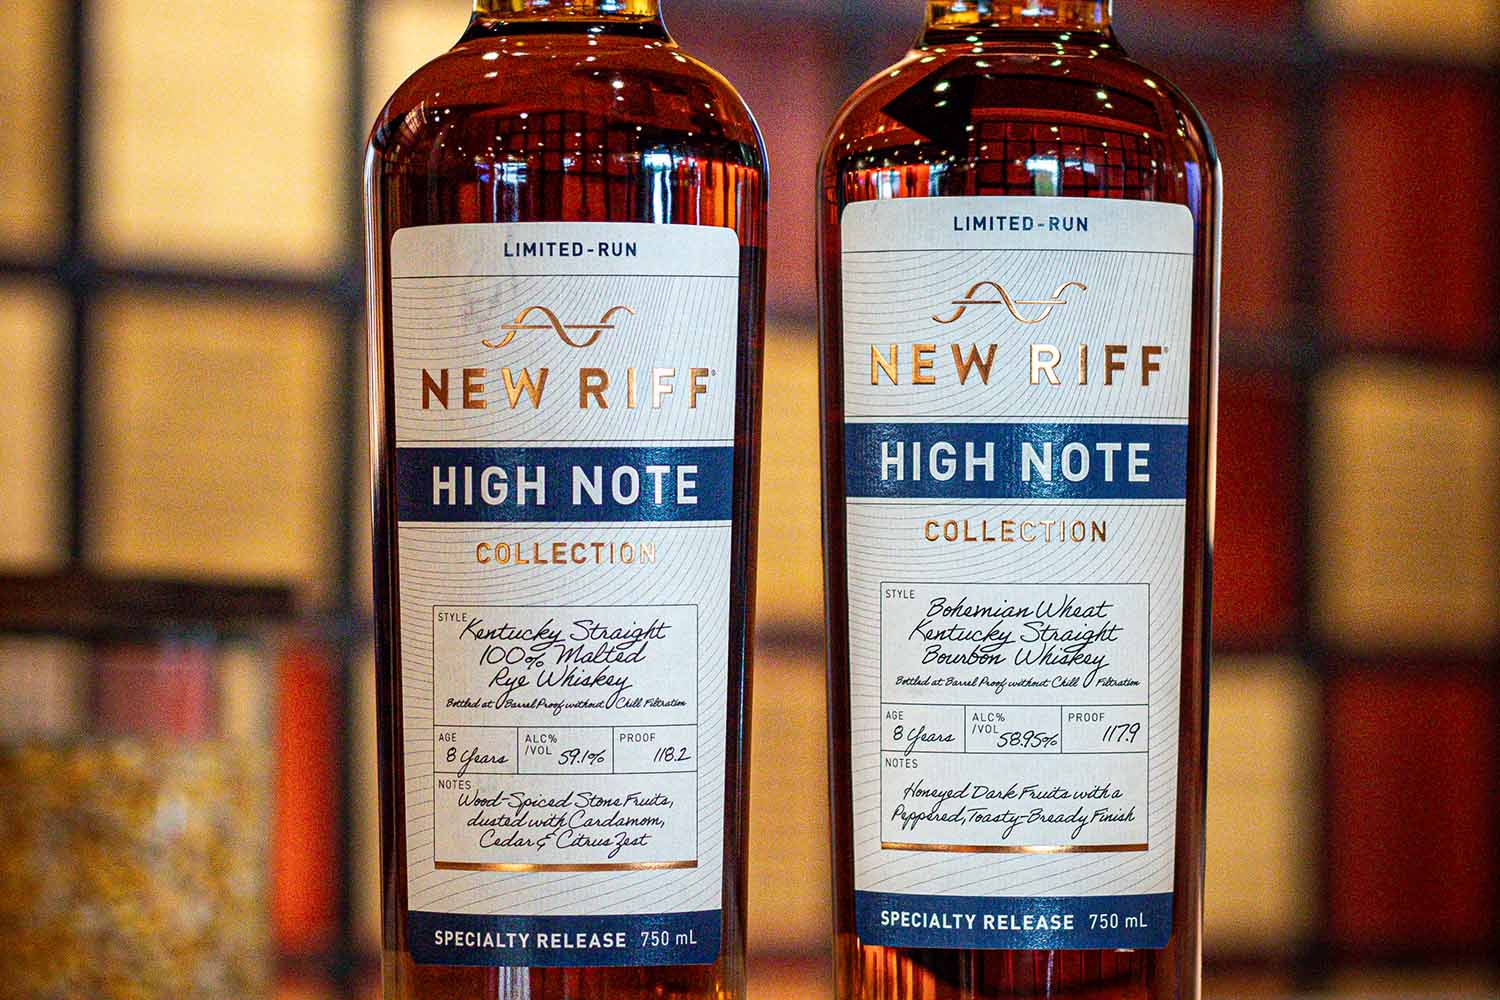 Two bottles from the New Riff High Note Collection